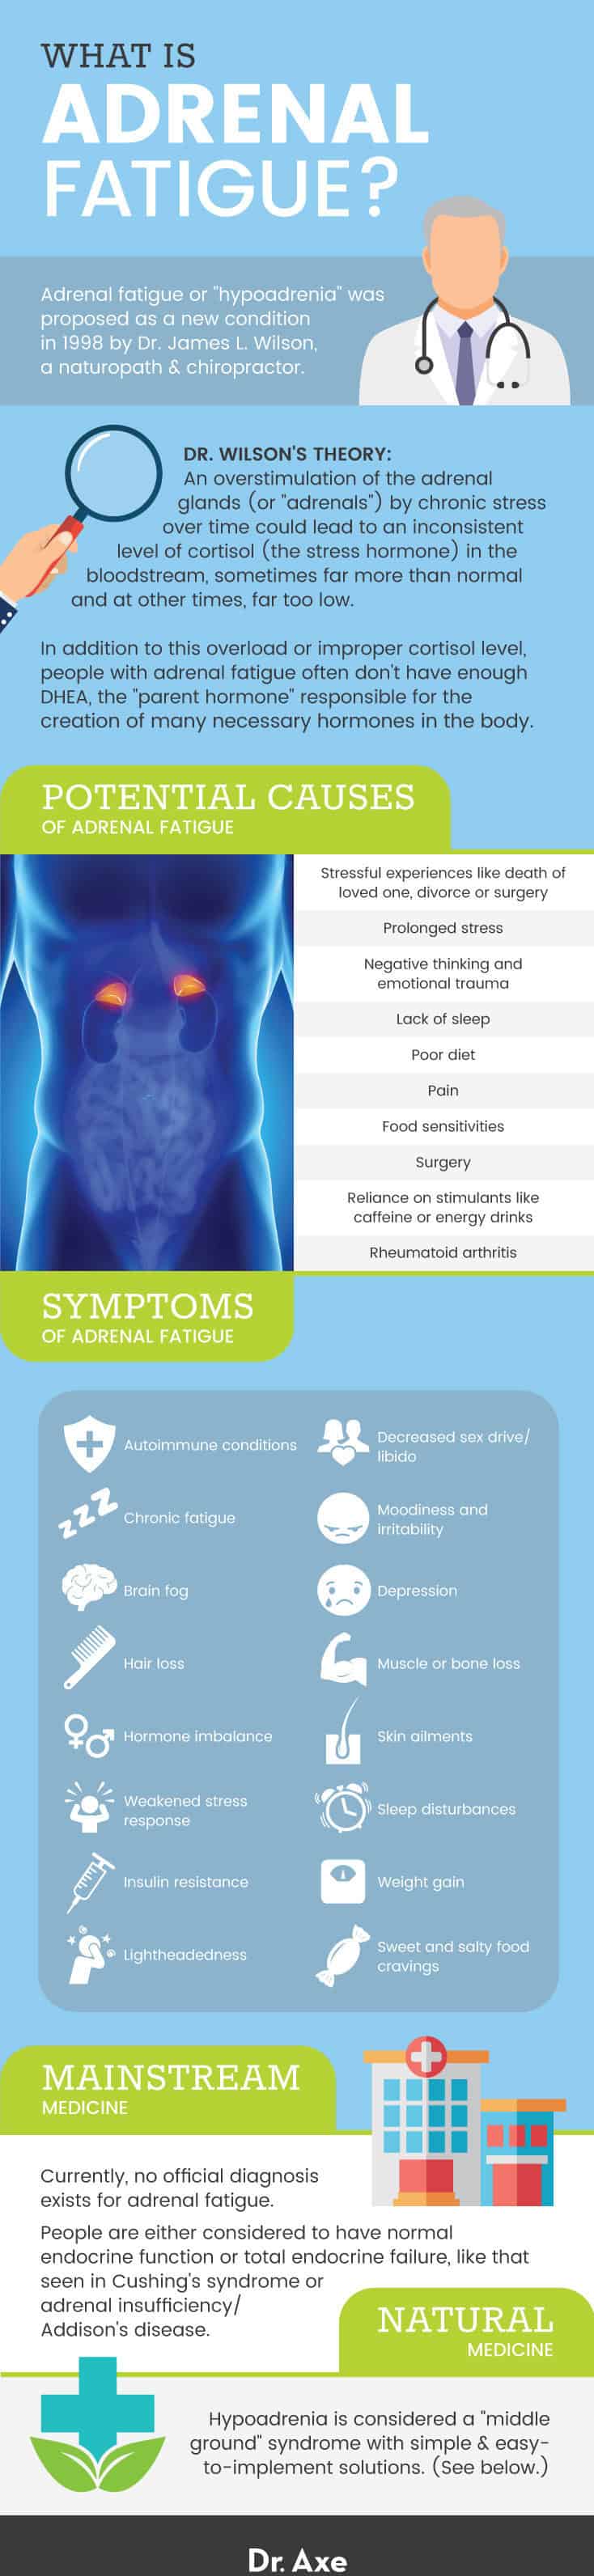 What is adrenal fatigue? - Dr. Axe